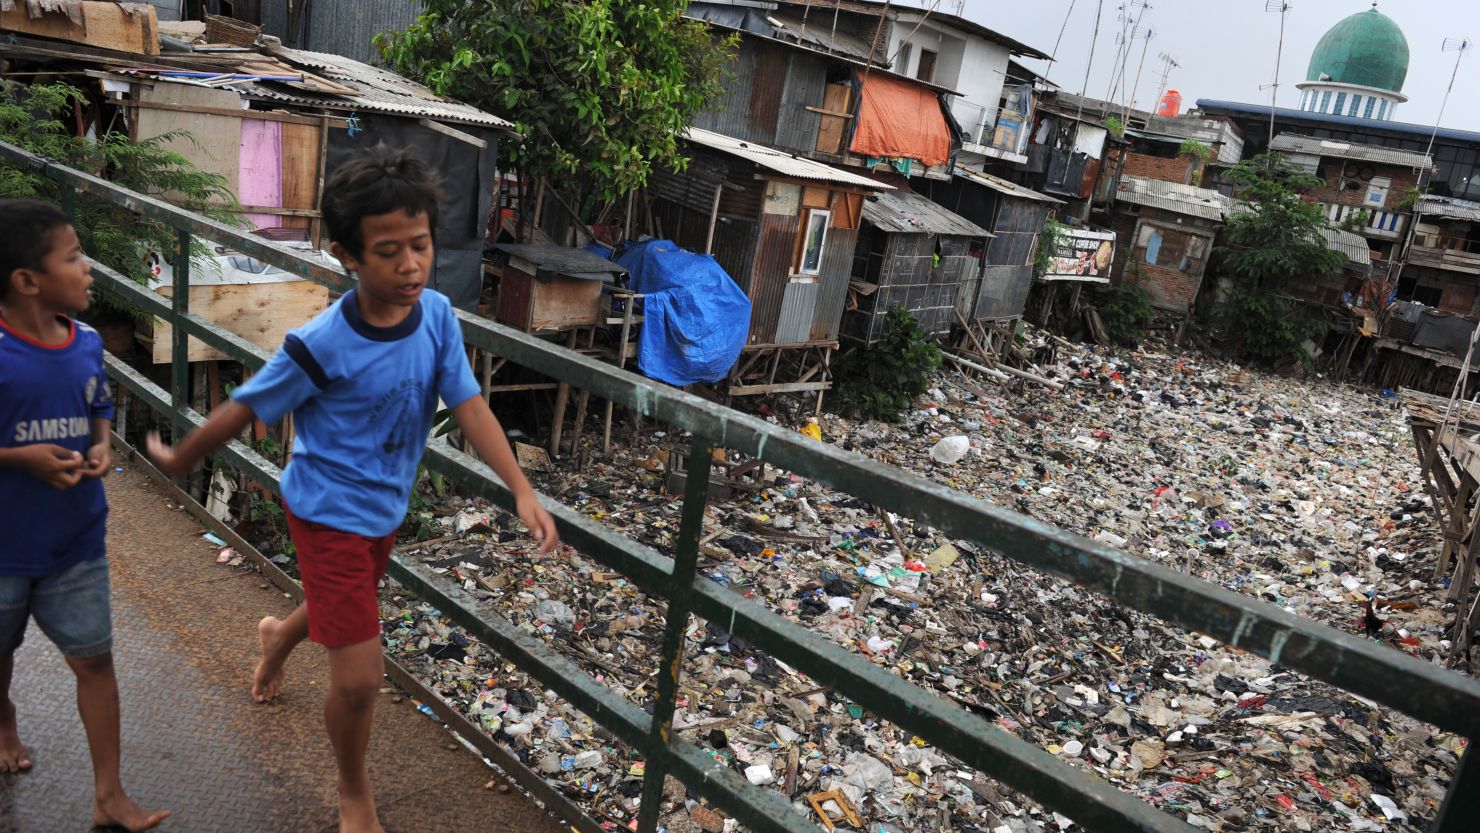 (File photo) Children walk on a footbridge over the polluted Cipinang river in Jakarta on November 13, 2012